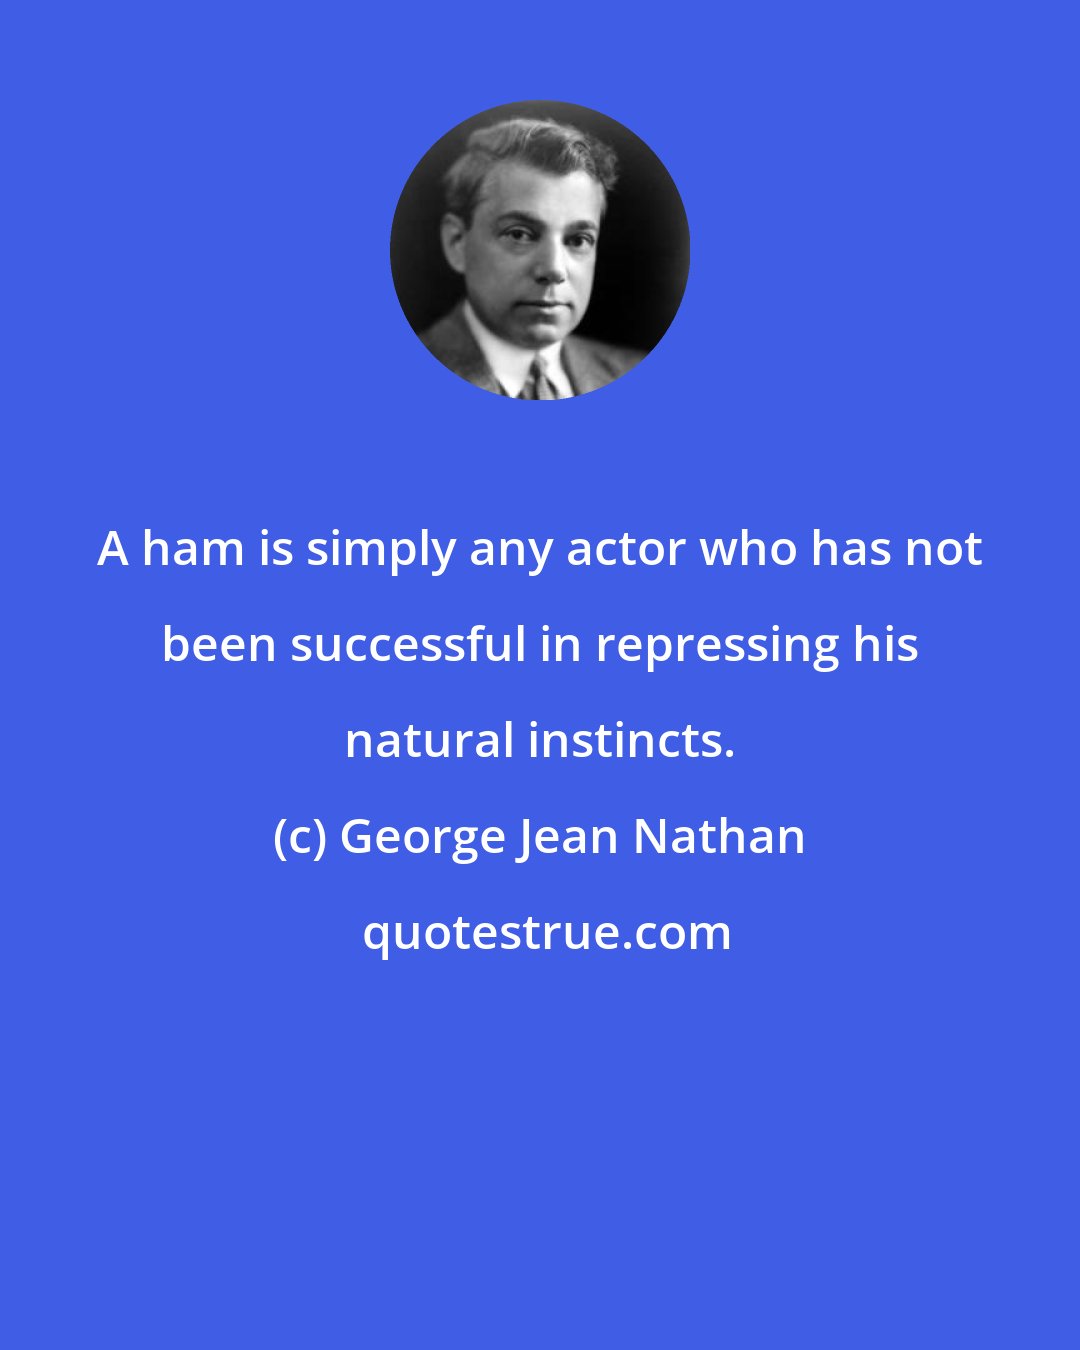 George Jean Nathan: A ham is simply any actor who has not been successful in repressing his natural instincts.